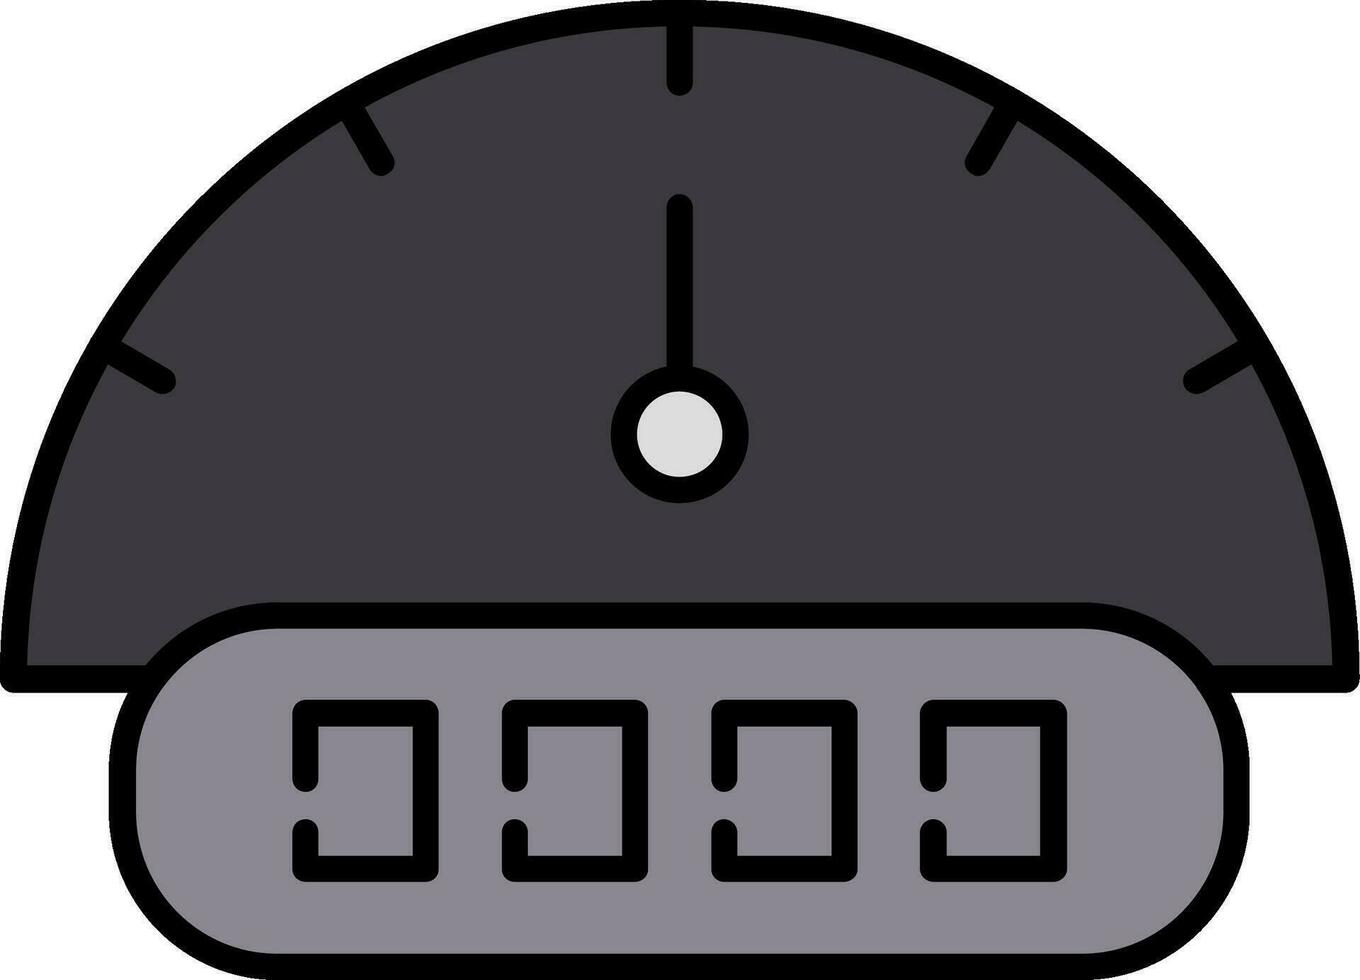 Tachometer Line Filled Icon vector